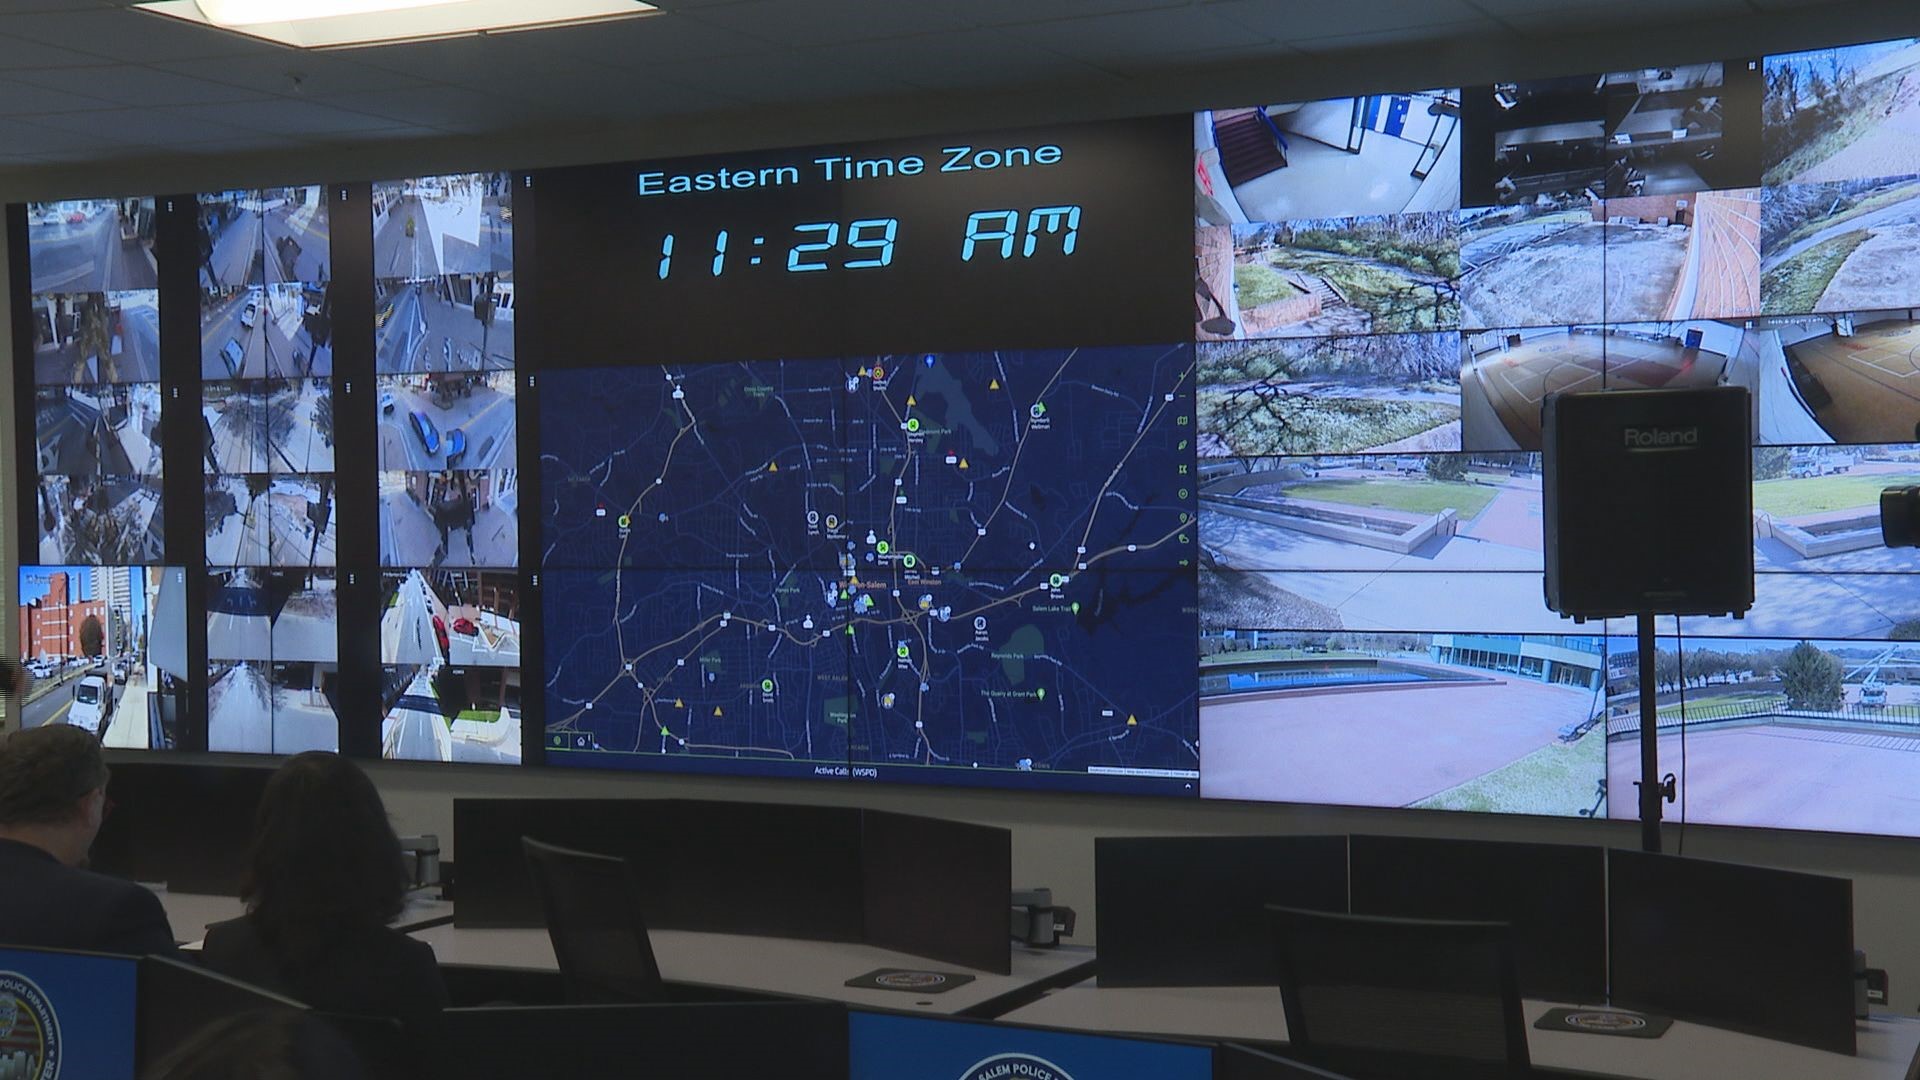 The department has access to cameras across the city to improve their ability to fight crime.